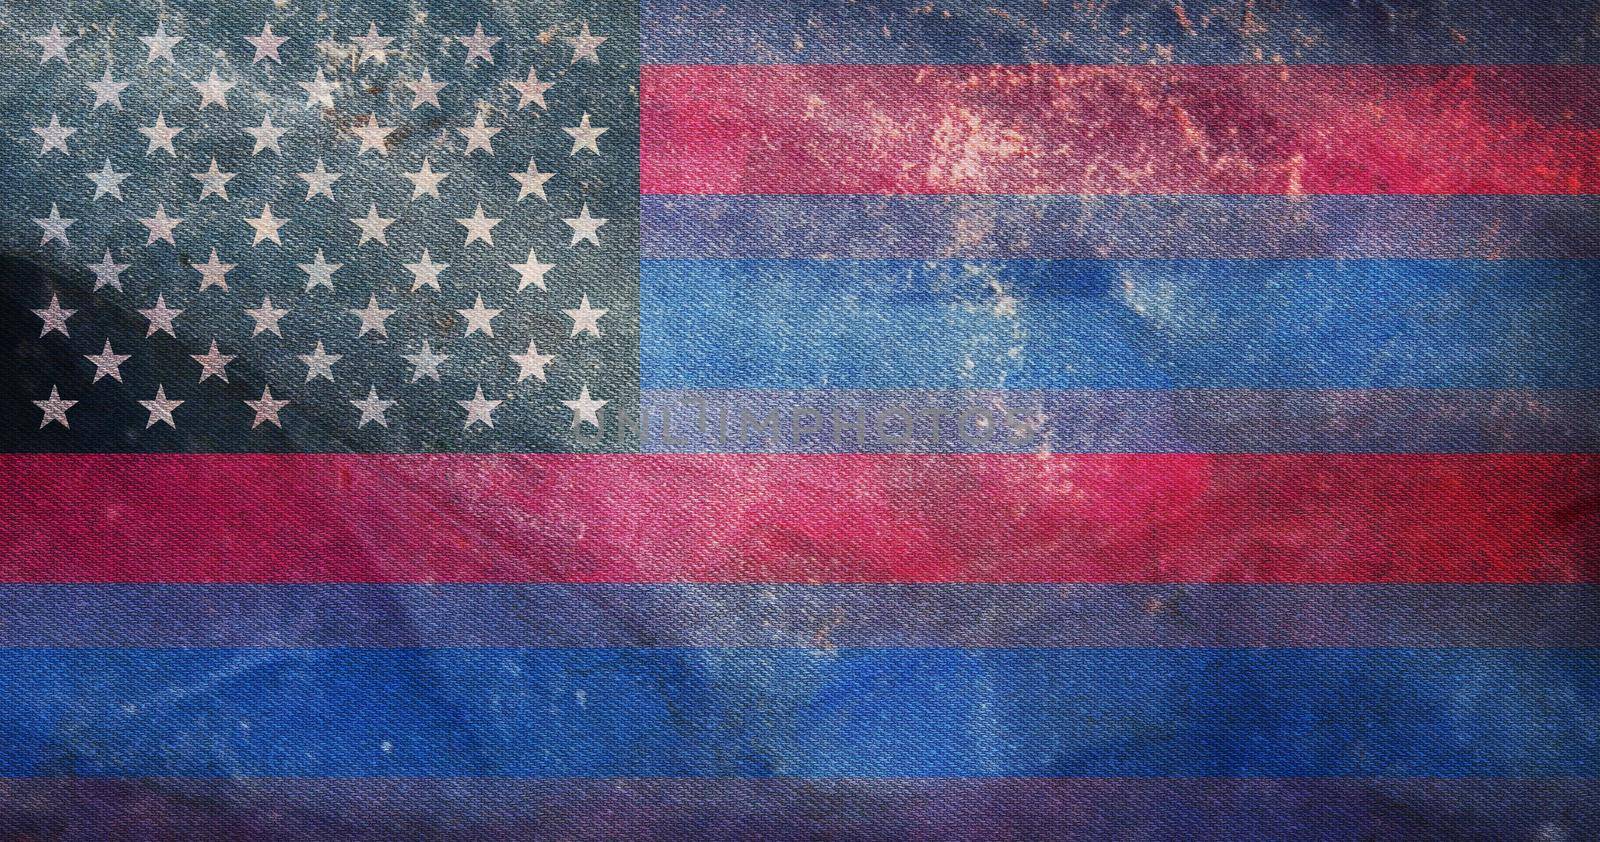 Top view of retro flag of BiAmerica with grunge texture, no flagpole. Plane design, layout. Flag background. Freedom and love concept. Pride month, activism, community and freedom